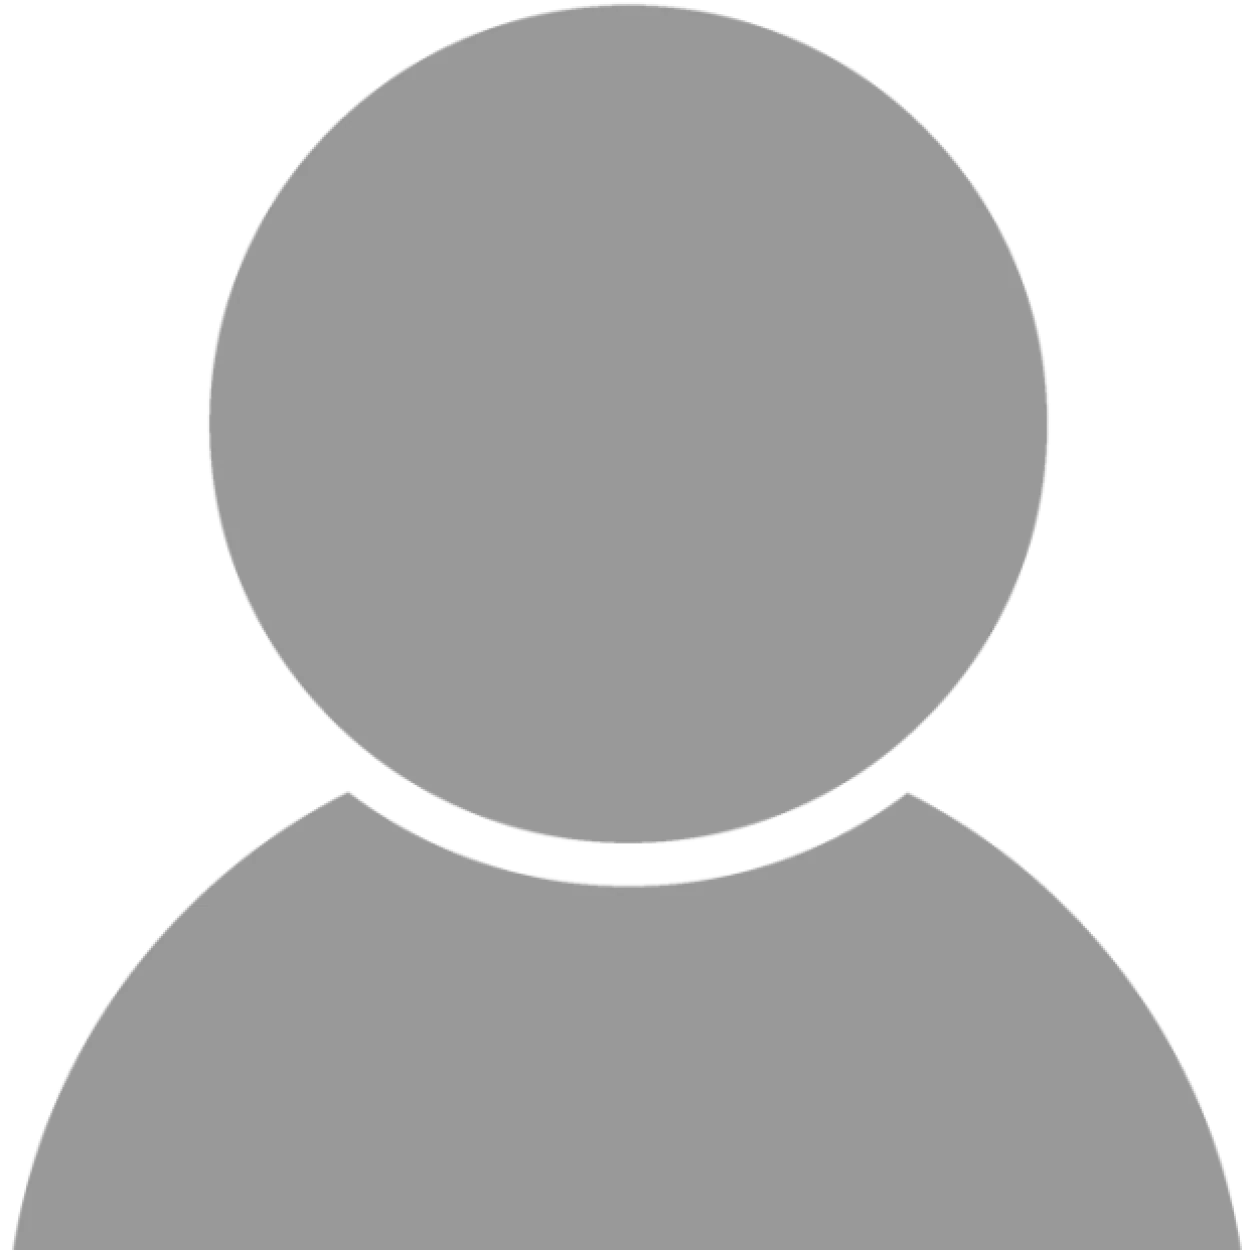 Placeholder Person Image